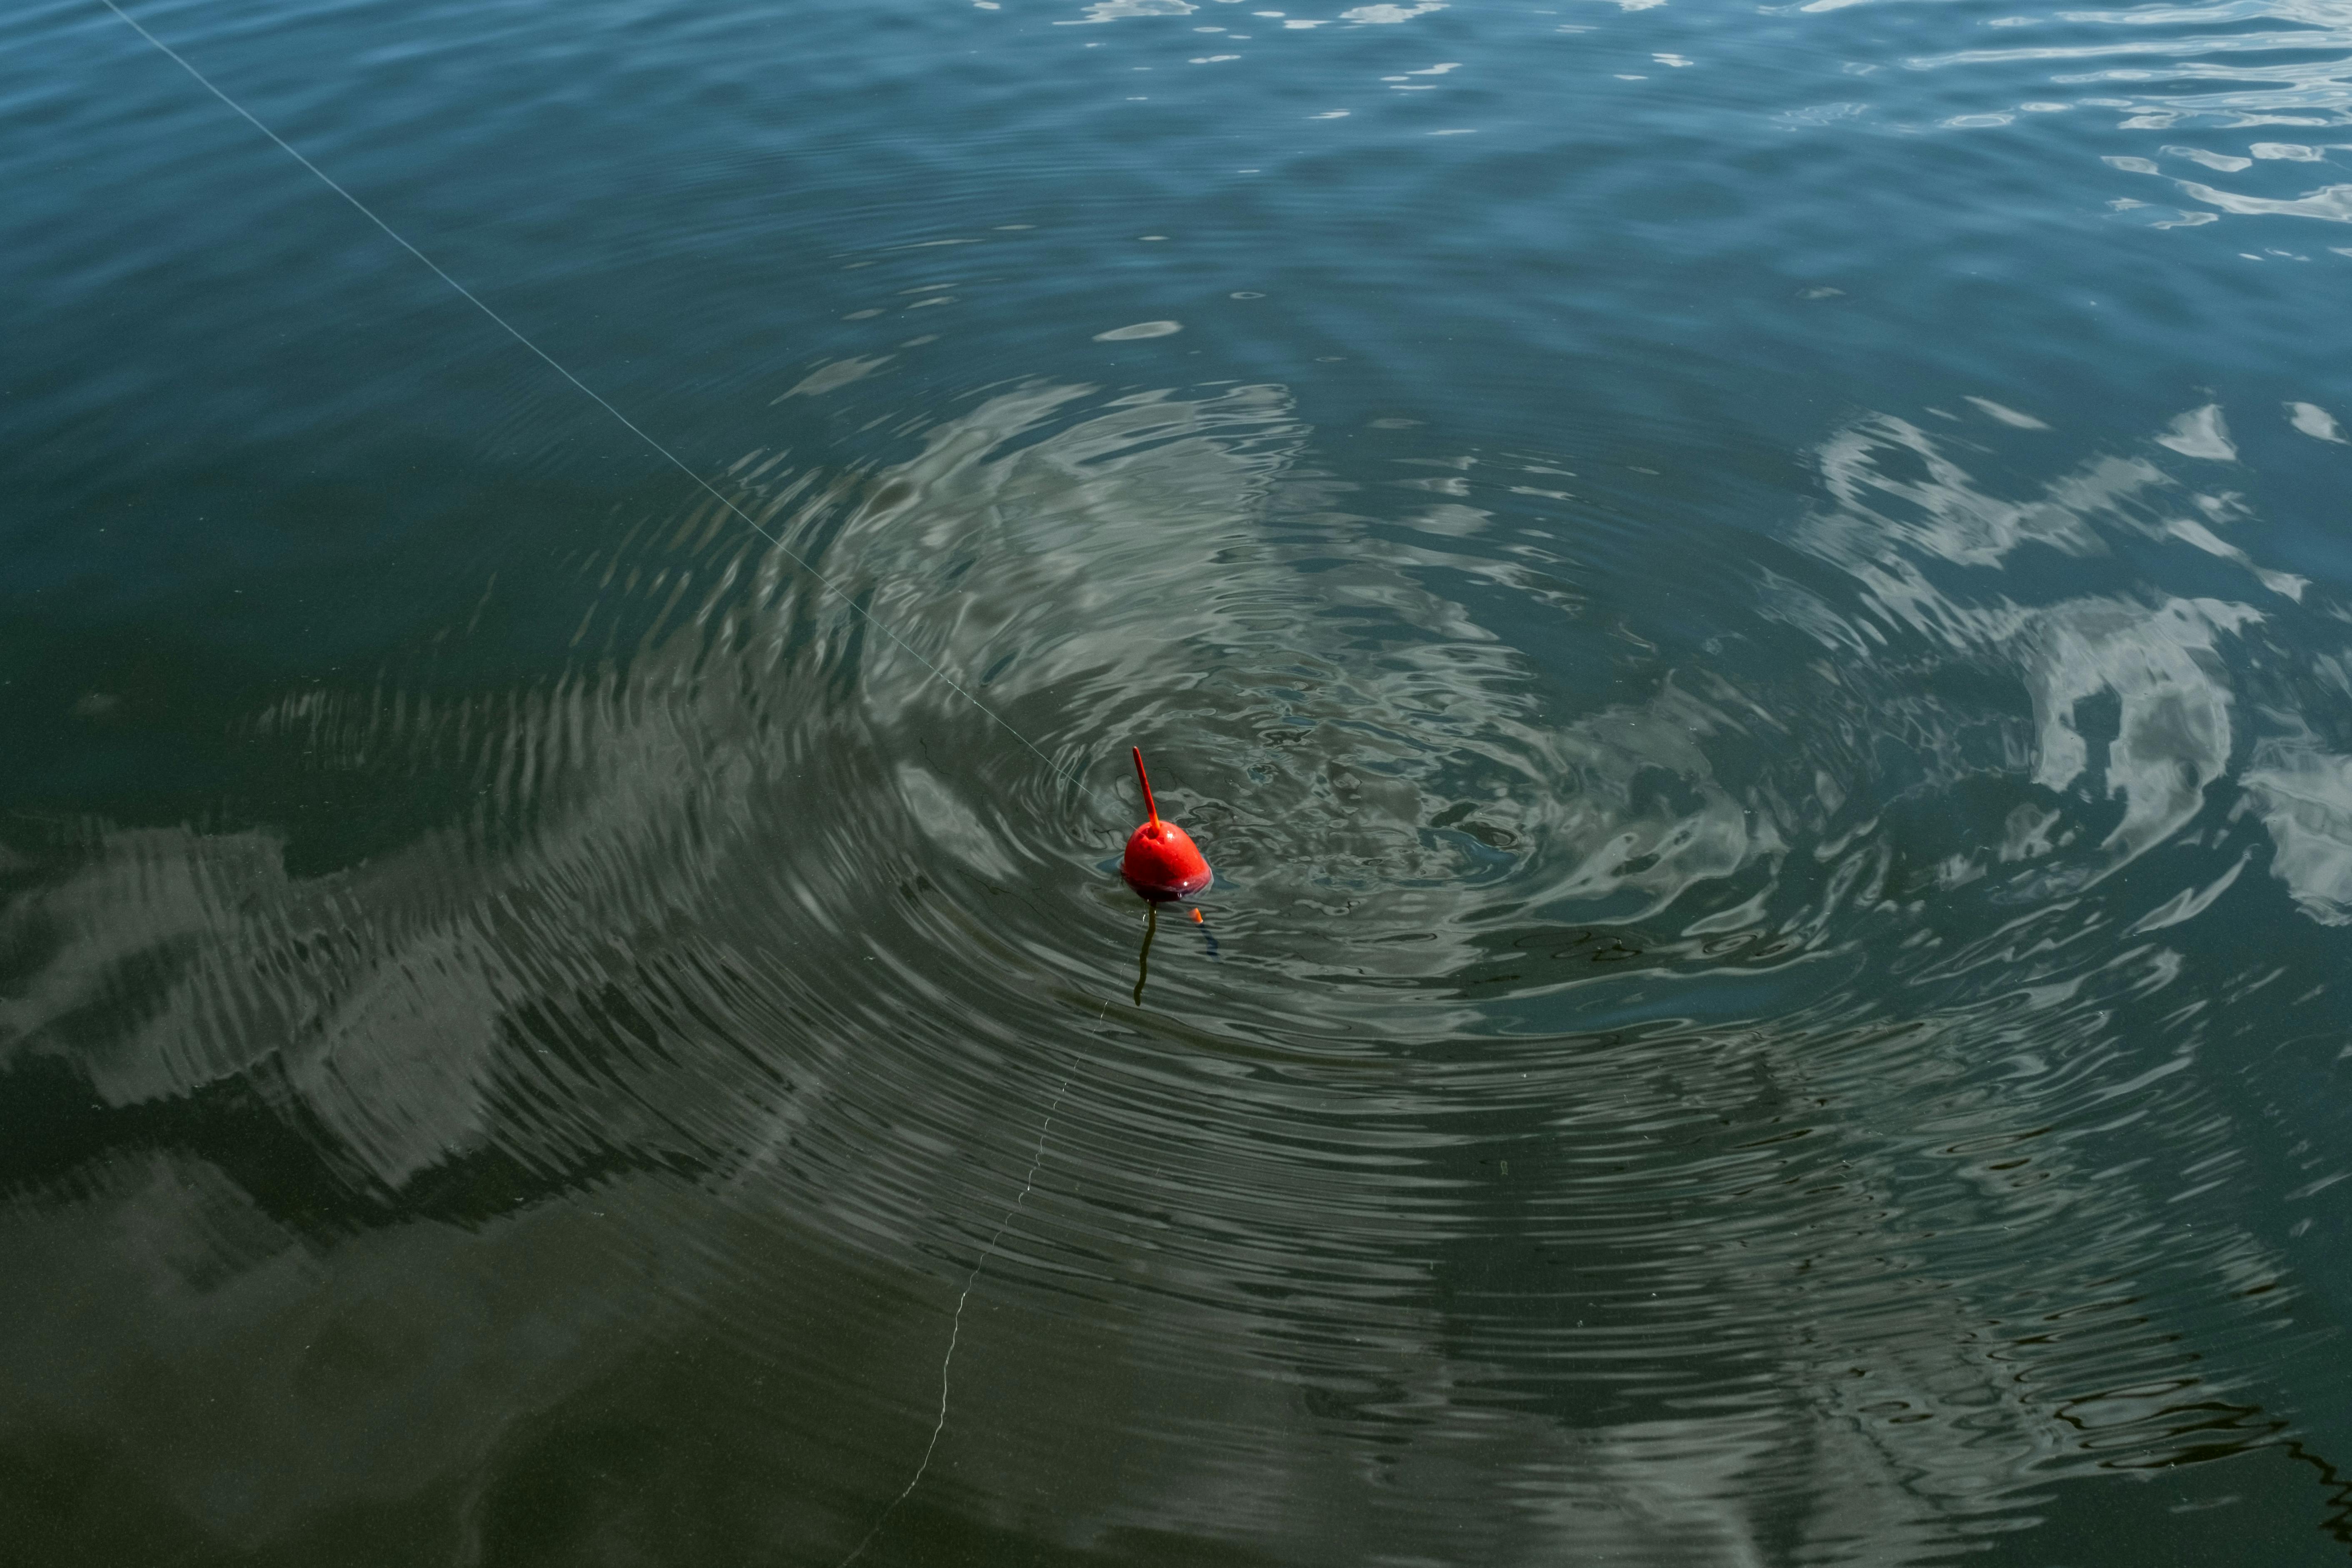 Fishing Floats and Ropes on Water · Free Stock Photo